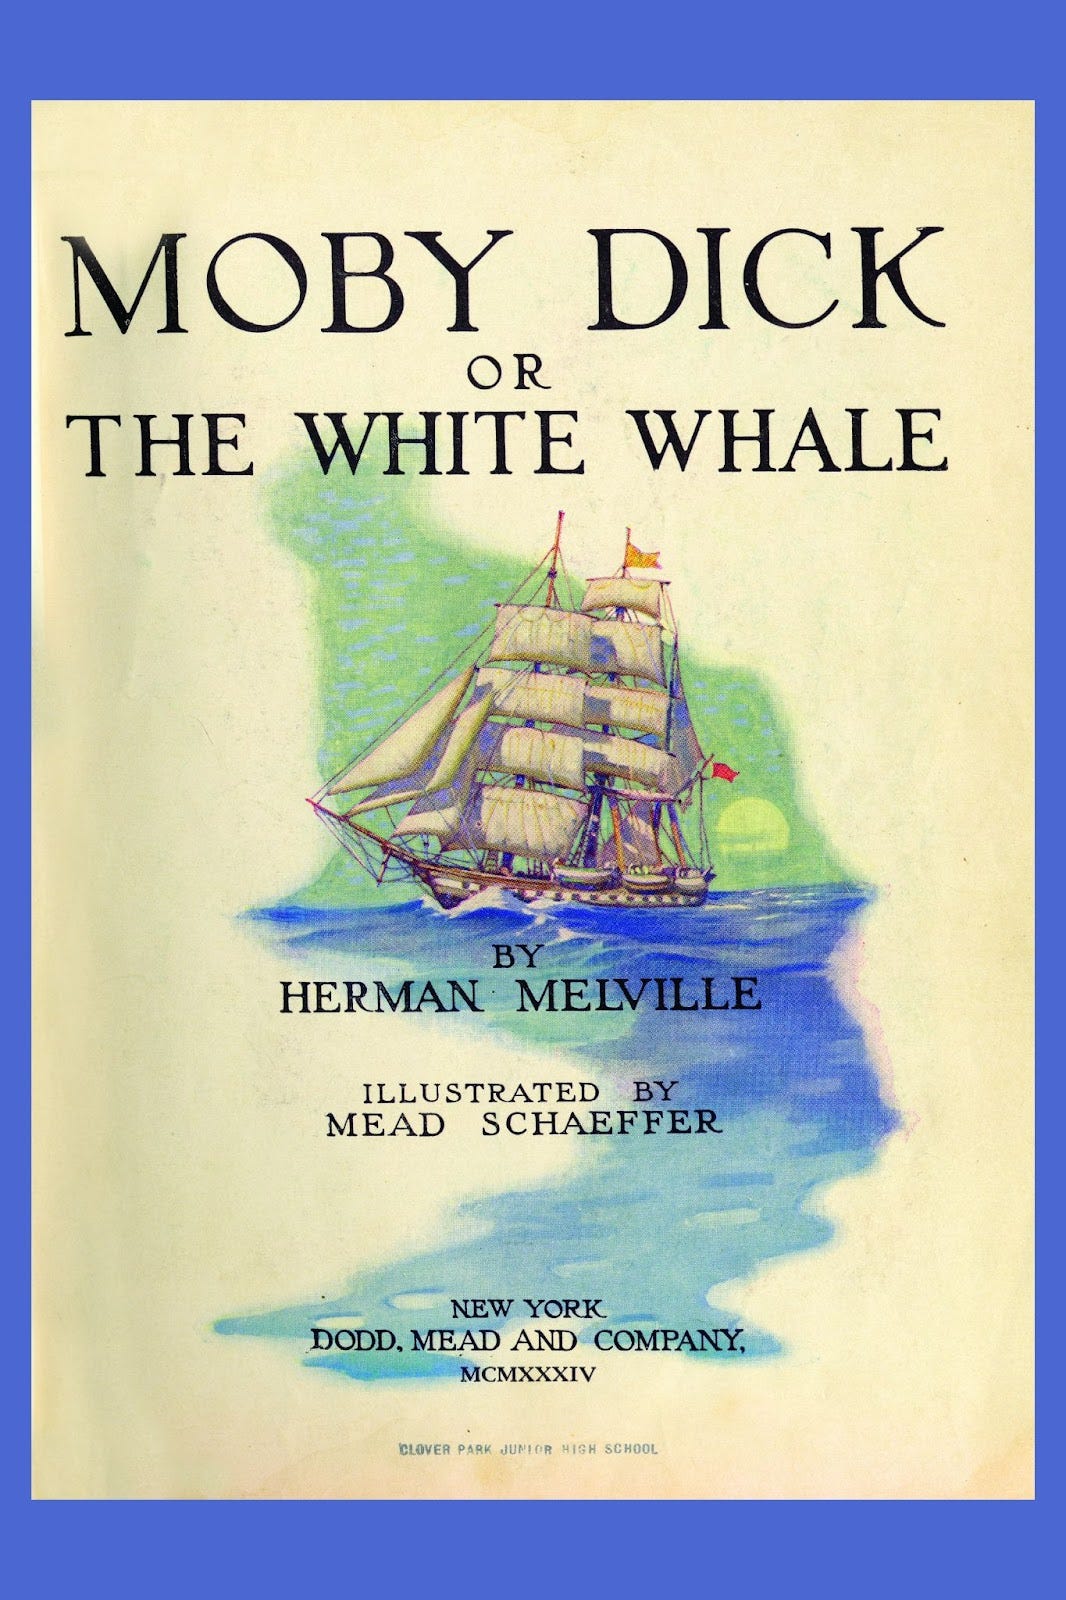 Moby-dick or the whale bering sea